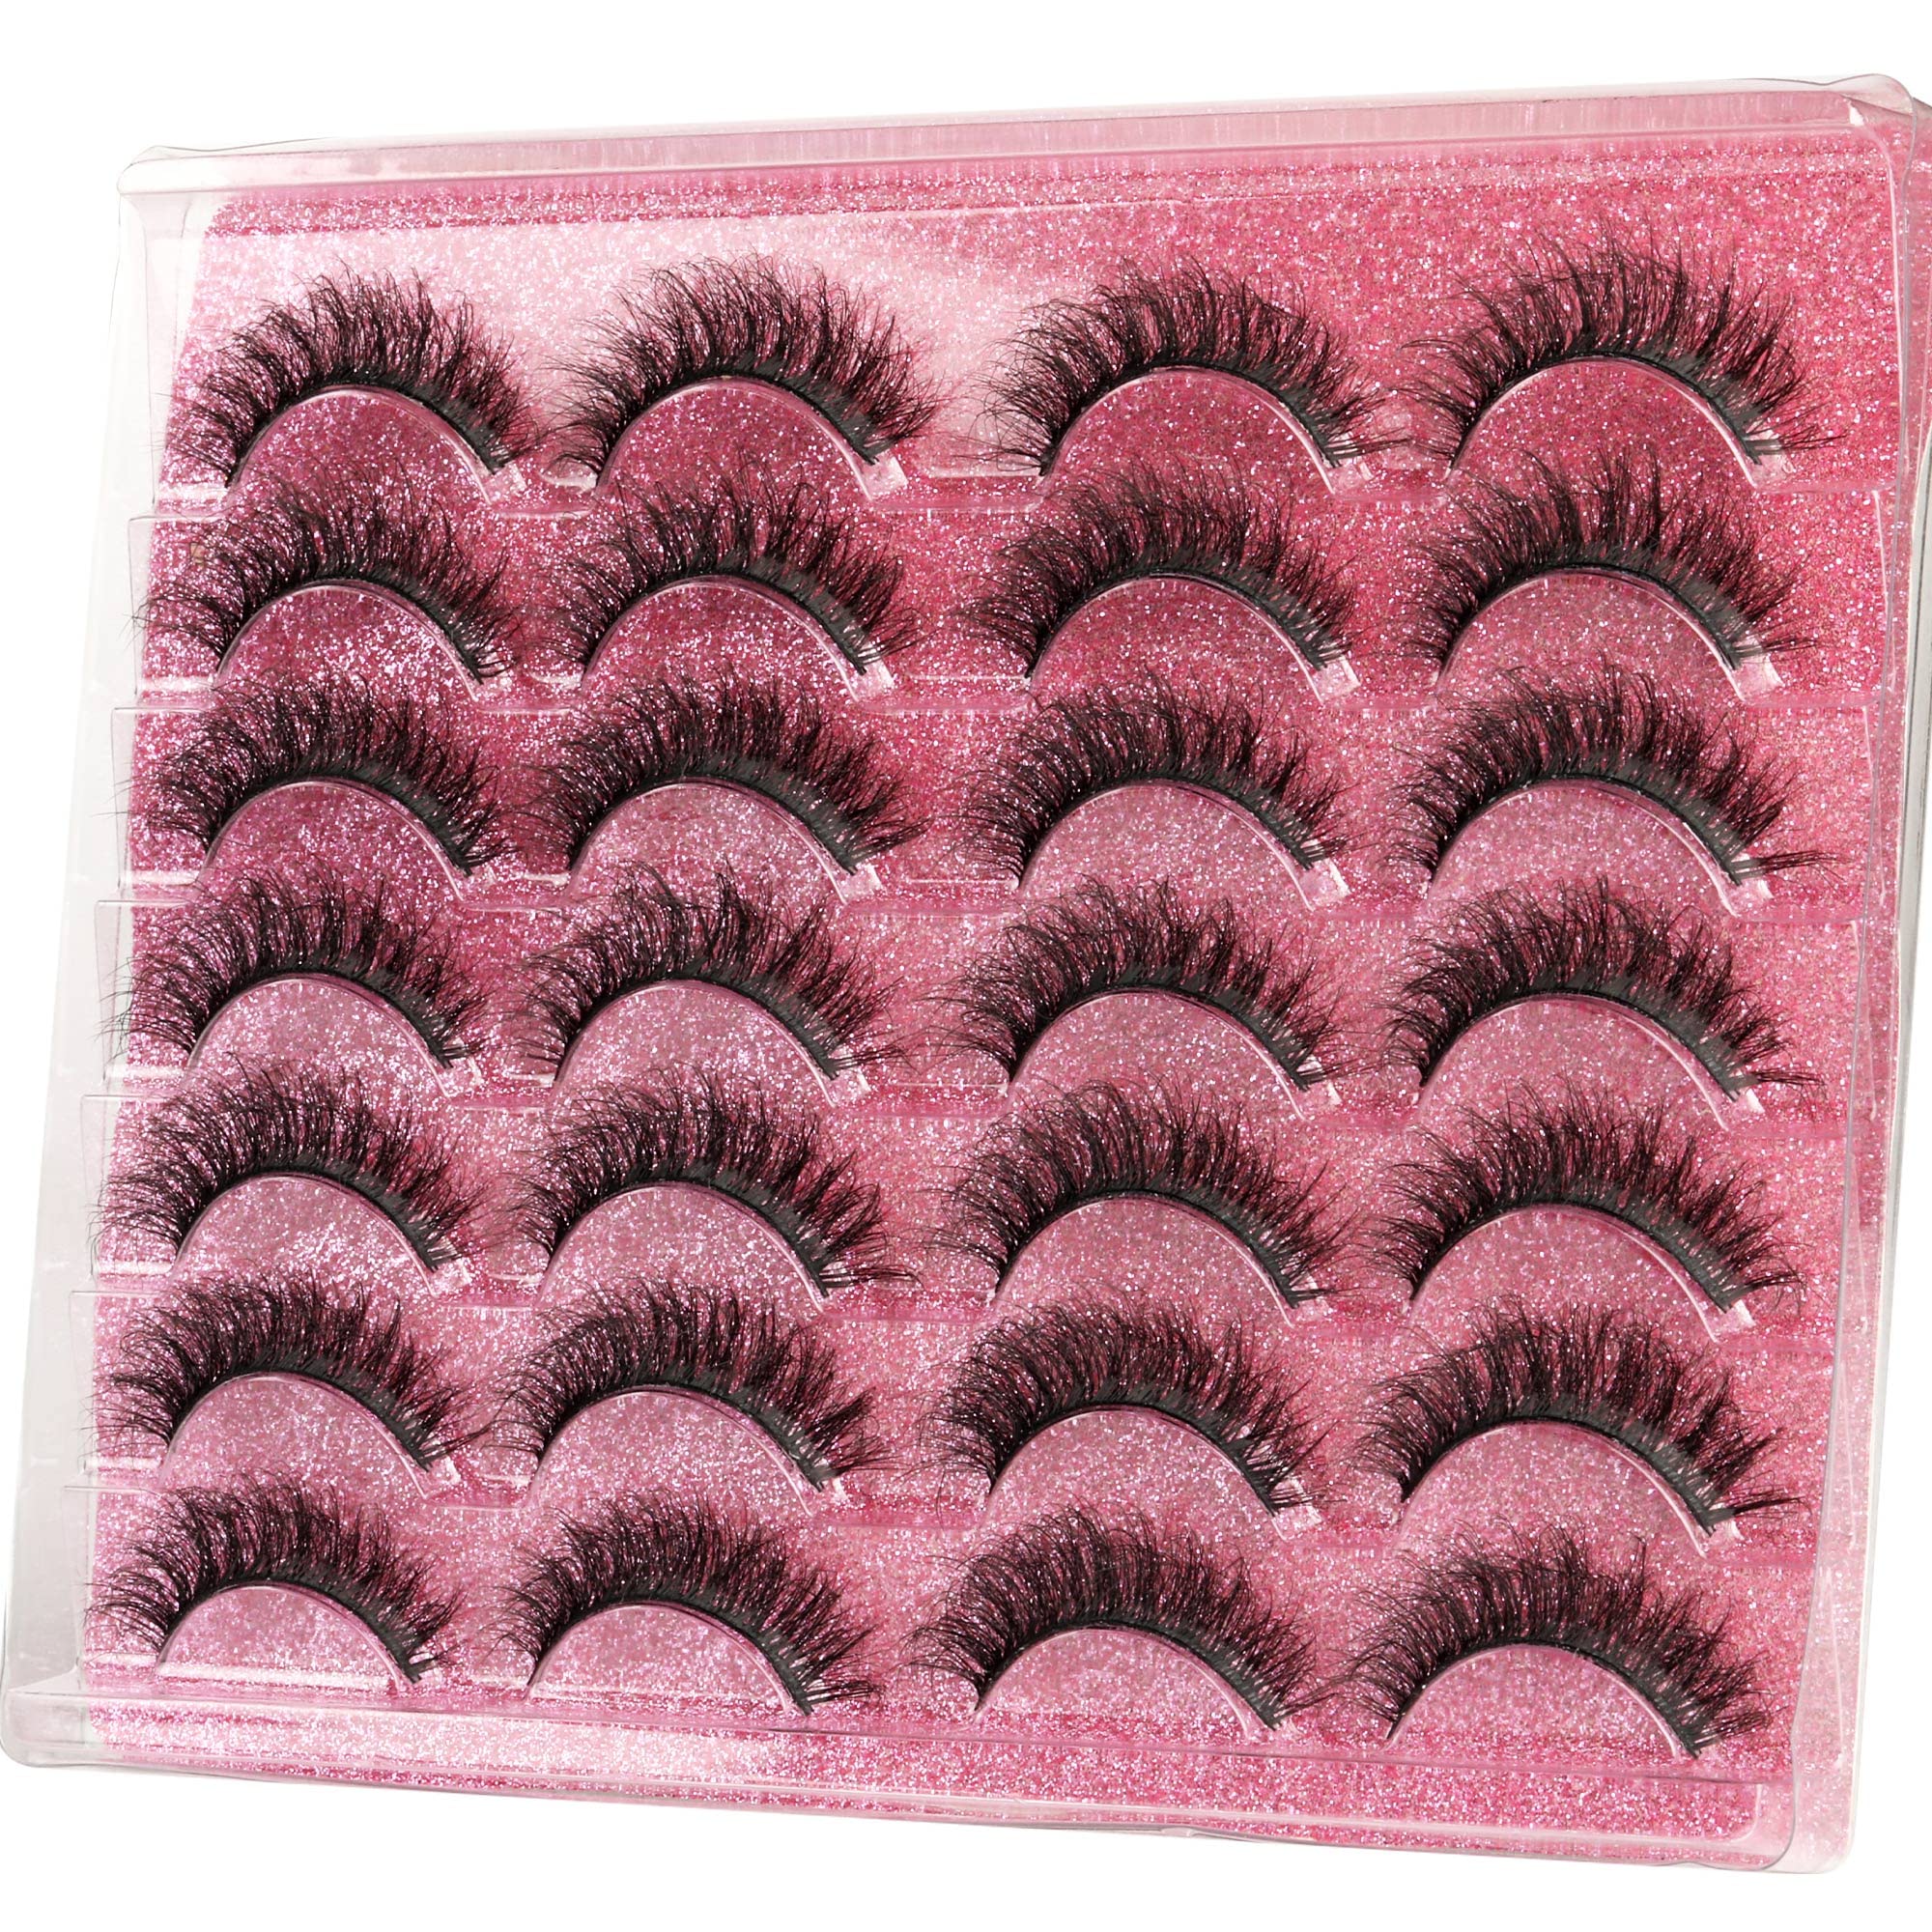 Newcally Lashes False Eyelashes Natural Fluffy Faux Mink Lashes Pack Cat Eye Wispy 5D 13MM Fake Eye Lashes 14 Pairs Russian Strip Lashes Multipack